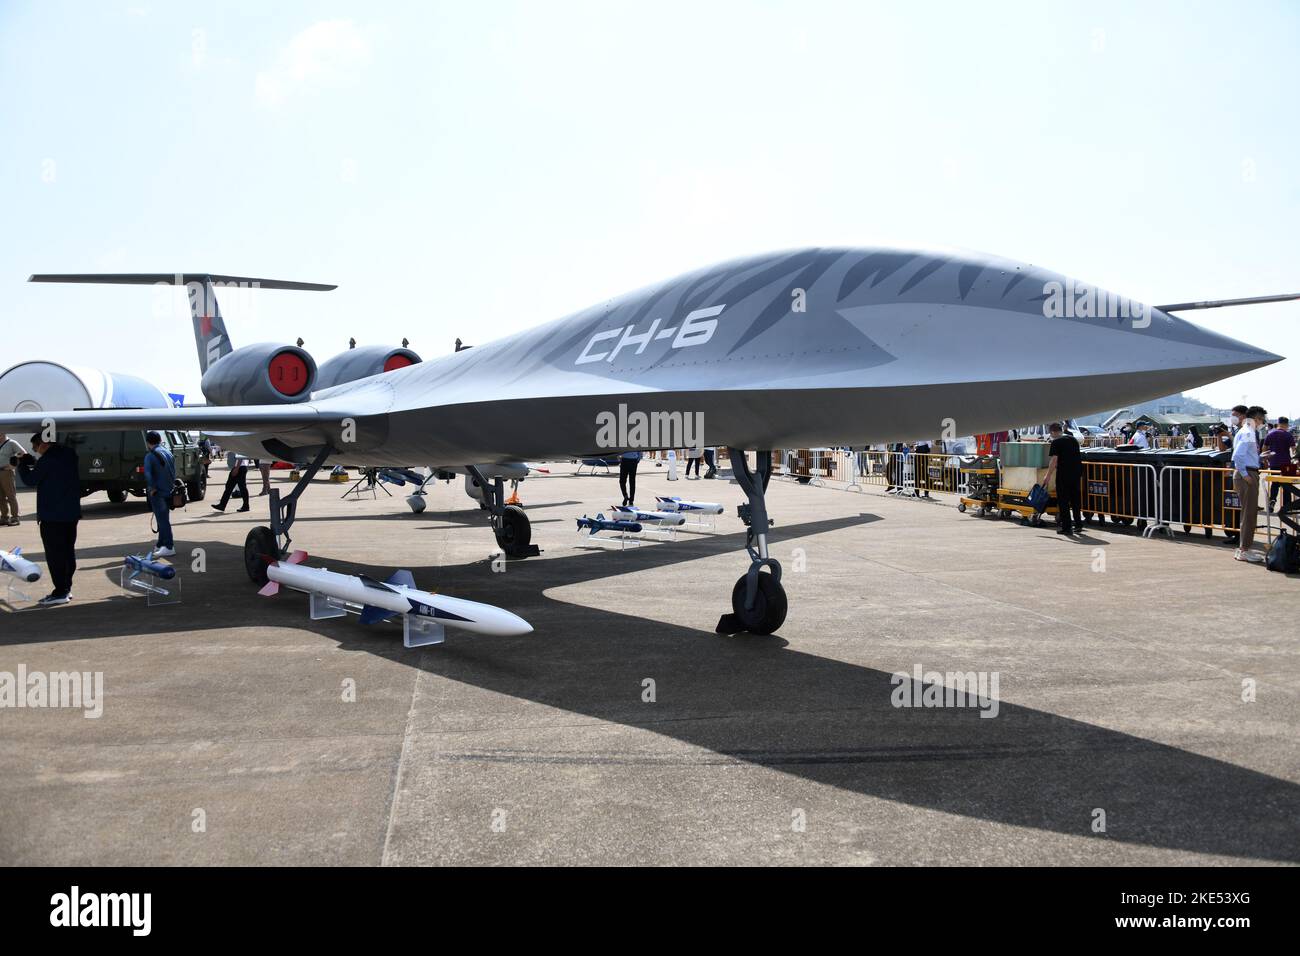 Zhuhai. 10th Nov, 2022. This photo taken on Nov. 10, 2022 shows a CH-6 unmanned aerial vehicle (UAV) displayed at the 14th China International Aviation and Aerospace Exhibition, also known as Airshow China, in the port city of Zhuhai, south China's Guangdong Province. A range of China's homegrown unmanned aerial vehicles (UAVs) and anti-drone system are showcased at the 14th Airshow China. Credit: Lu Hanxin/Xinhua/Alamy Live News Stock Photo